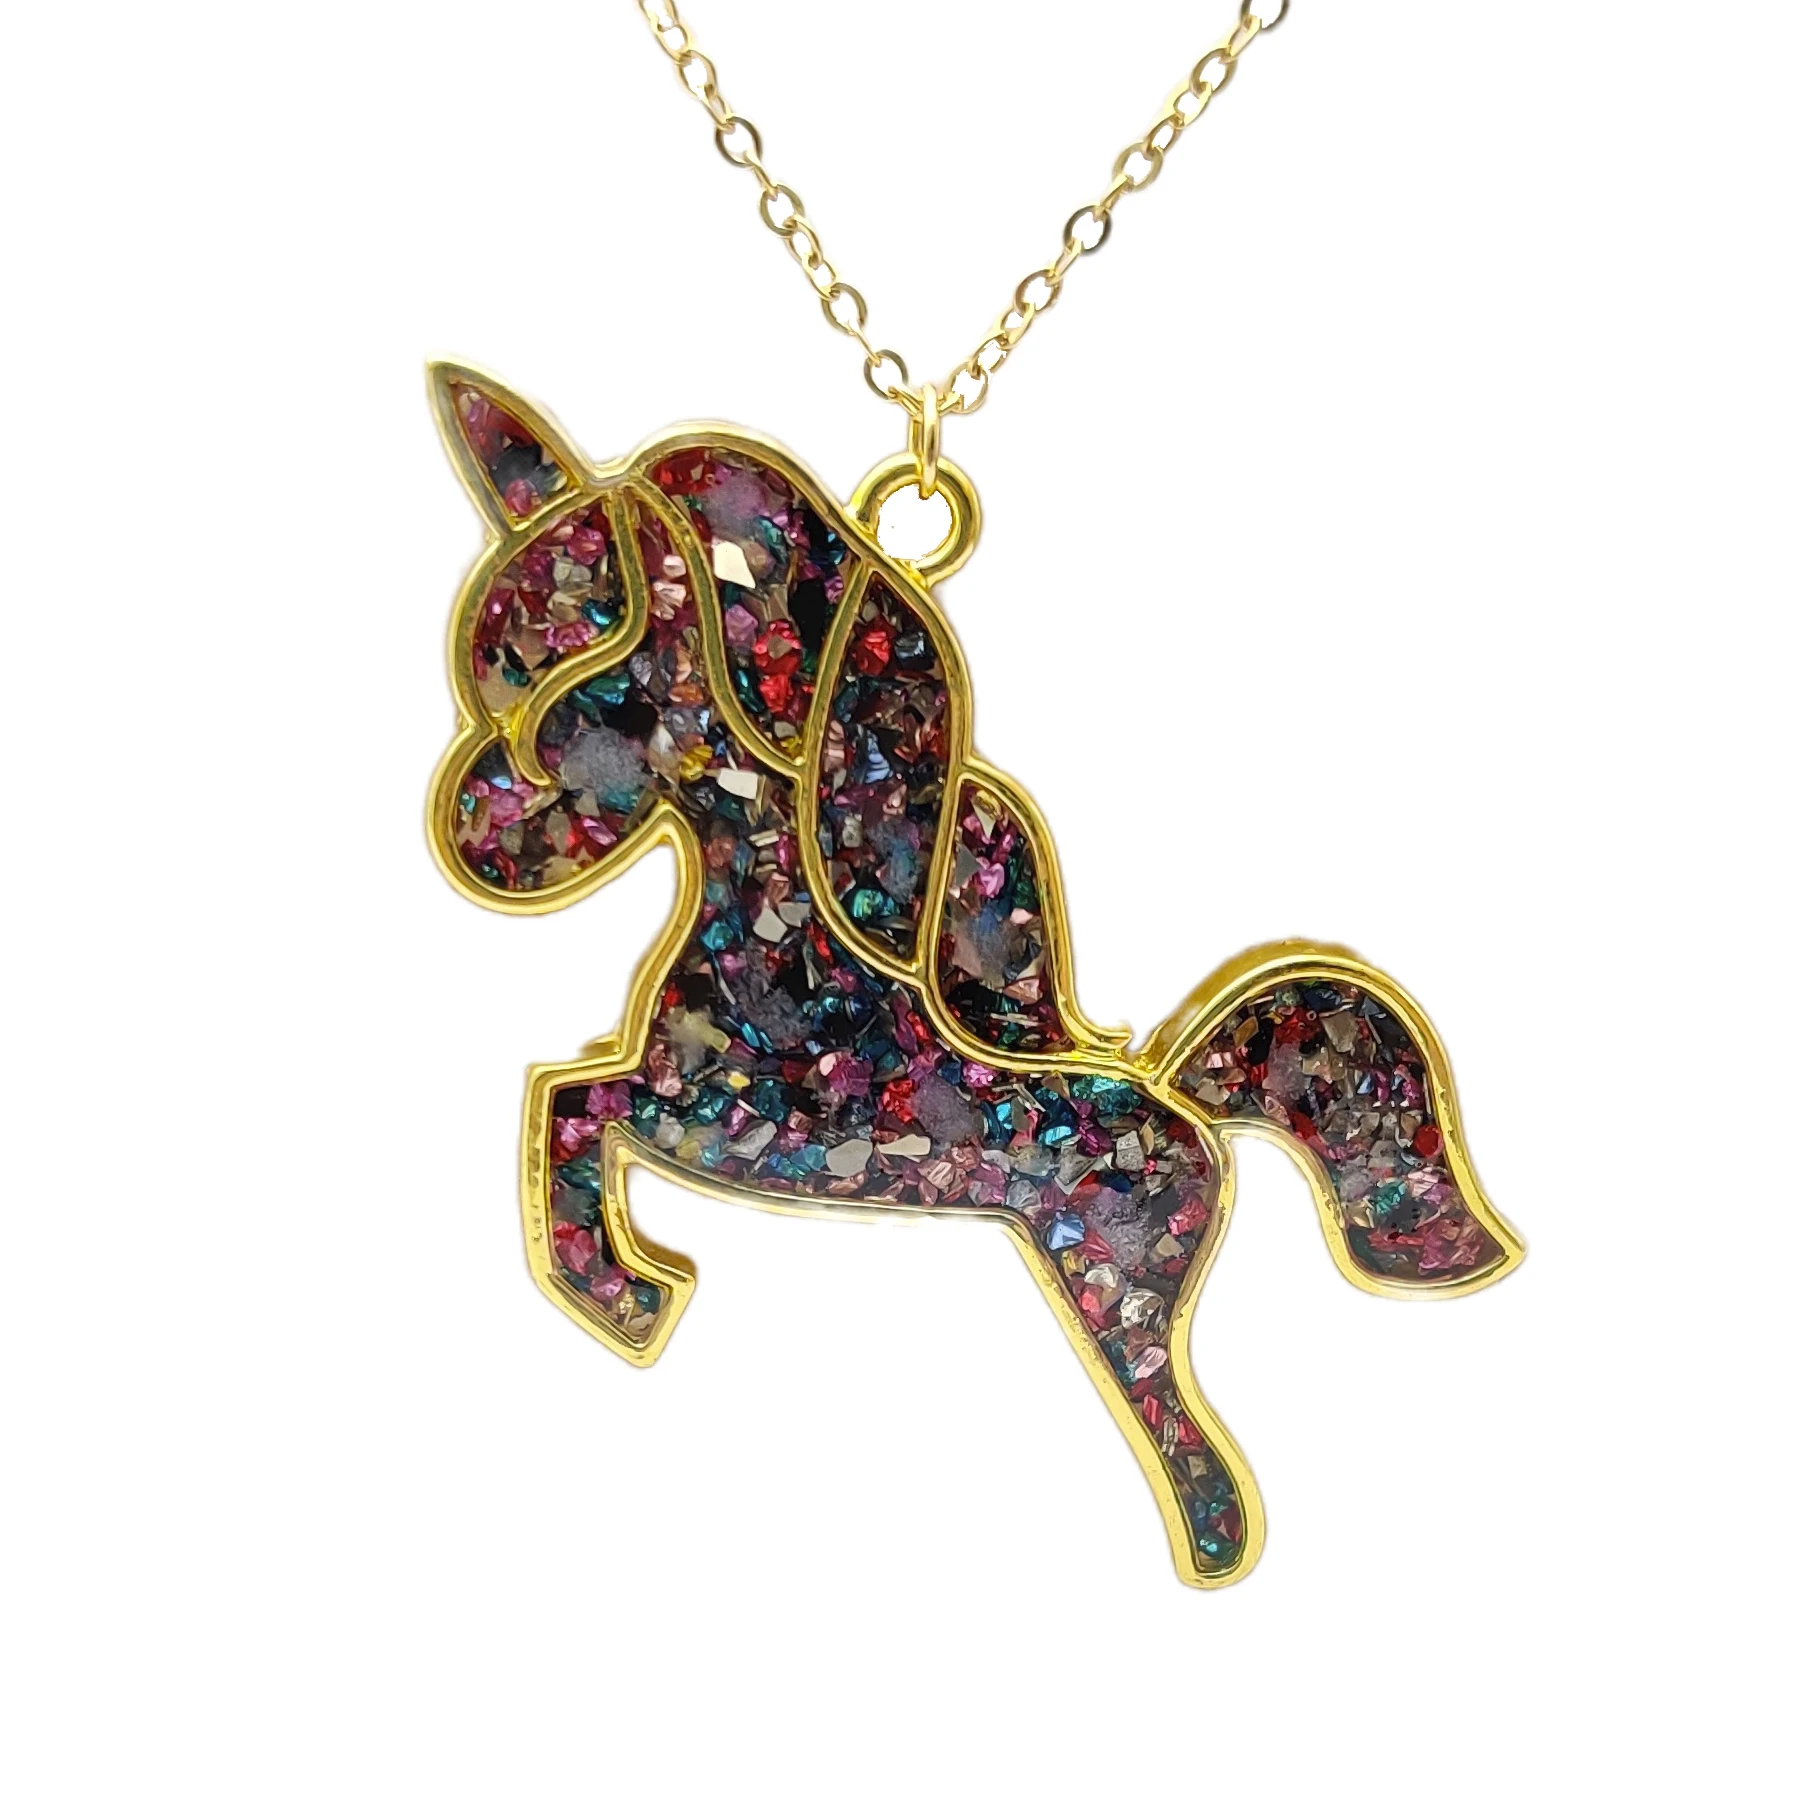 Unicorn Pegasus Colored Glow In The Dark Gold Color Pendant Chain Long Necklace Women Boho Fashion Jewelry Bohemian Handmade topqueen v101 sparking bridal veils long luxury golden bride wedding veil cathedral champagne colored yarn with sequins royal